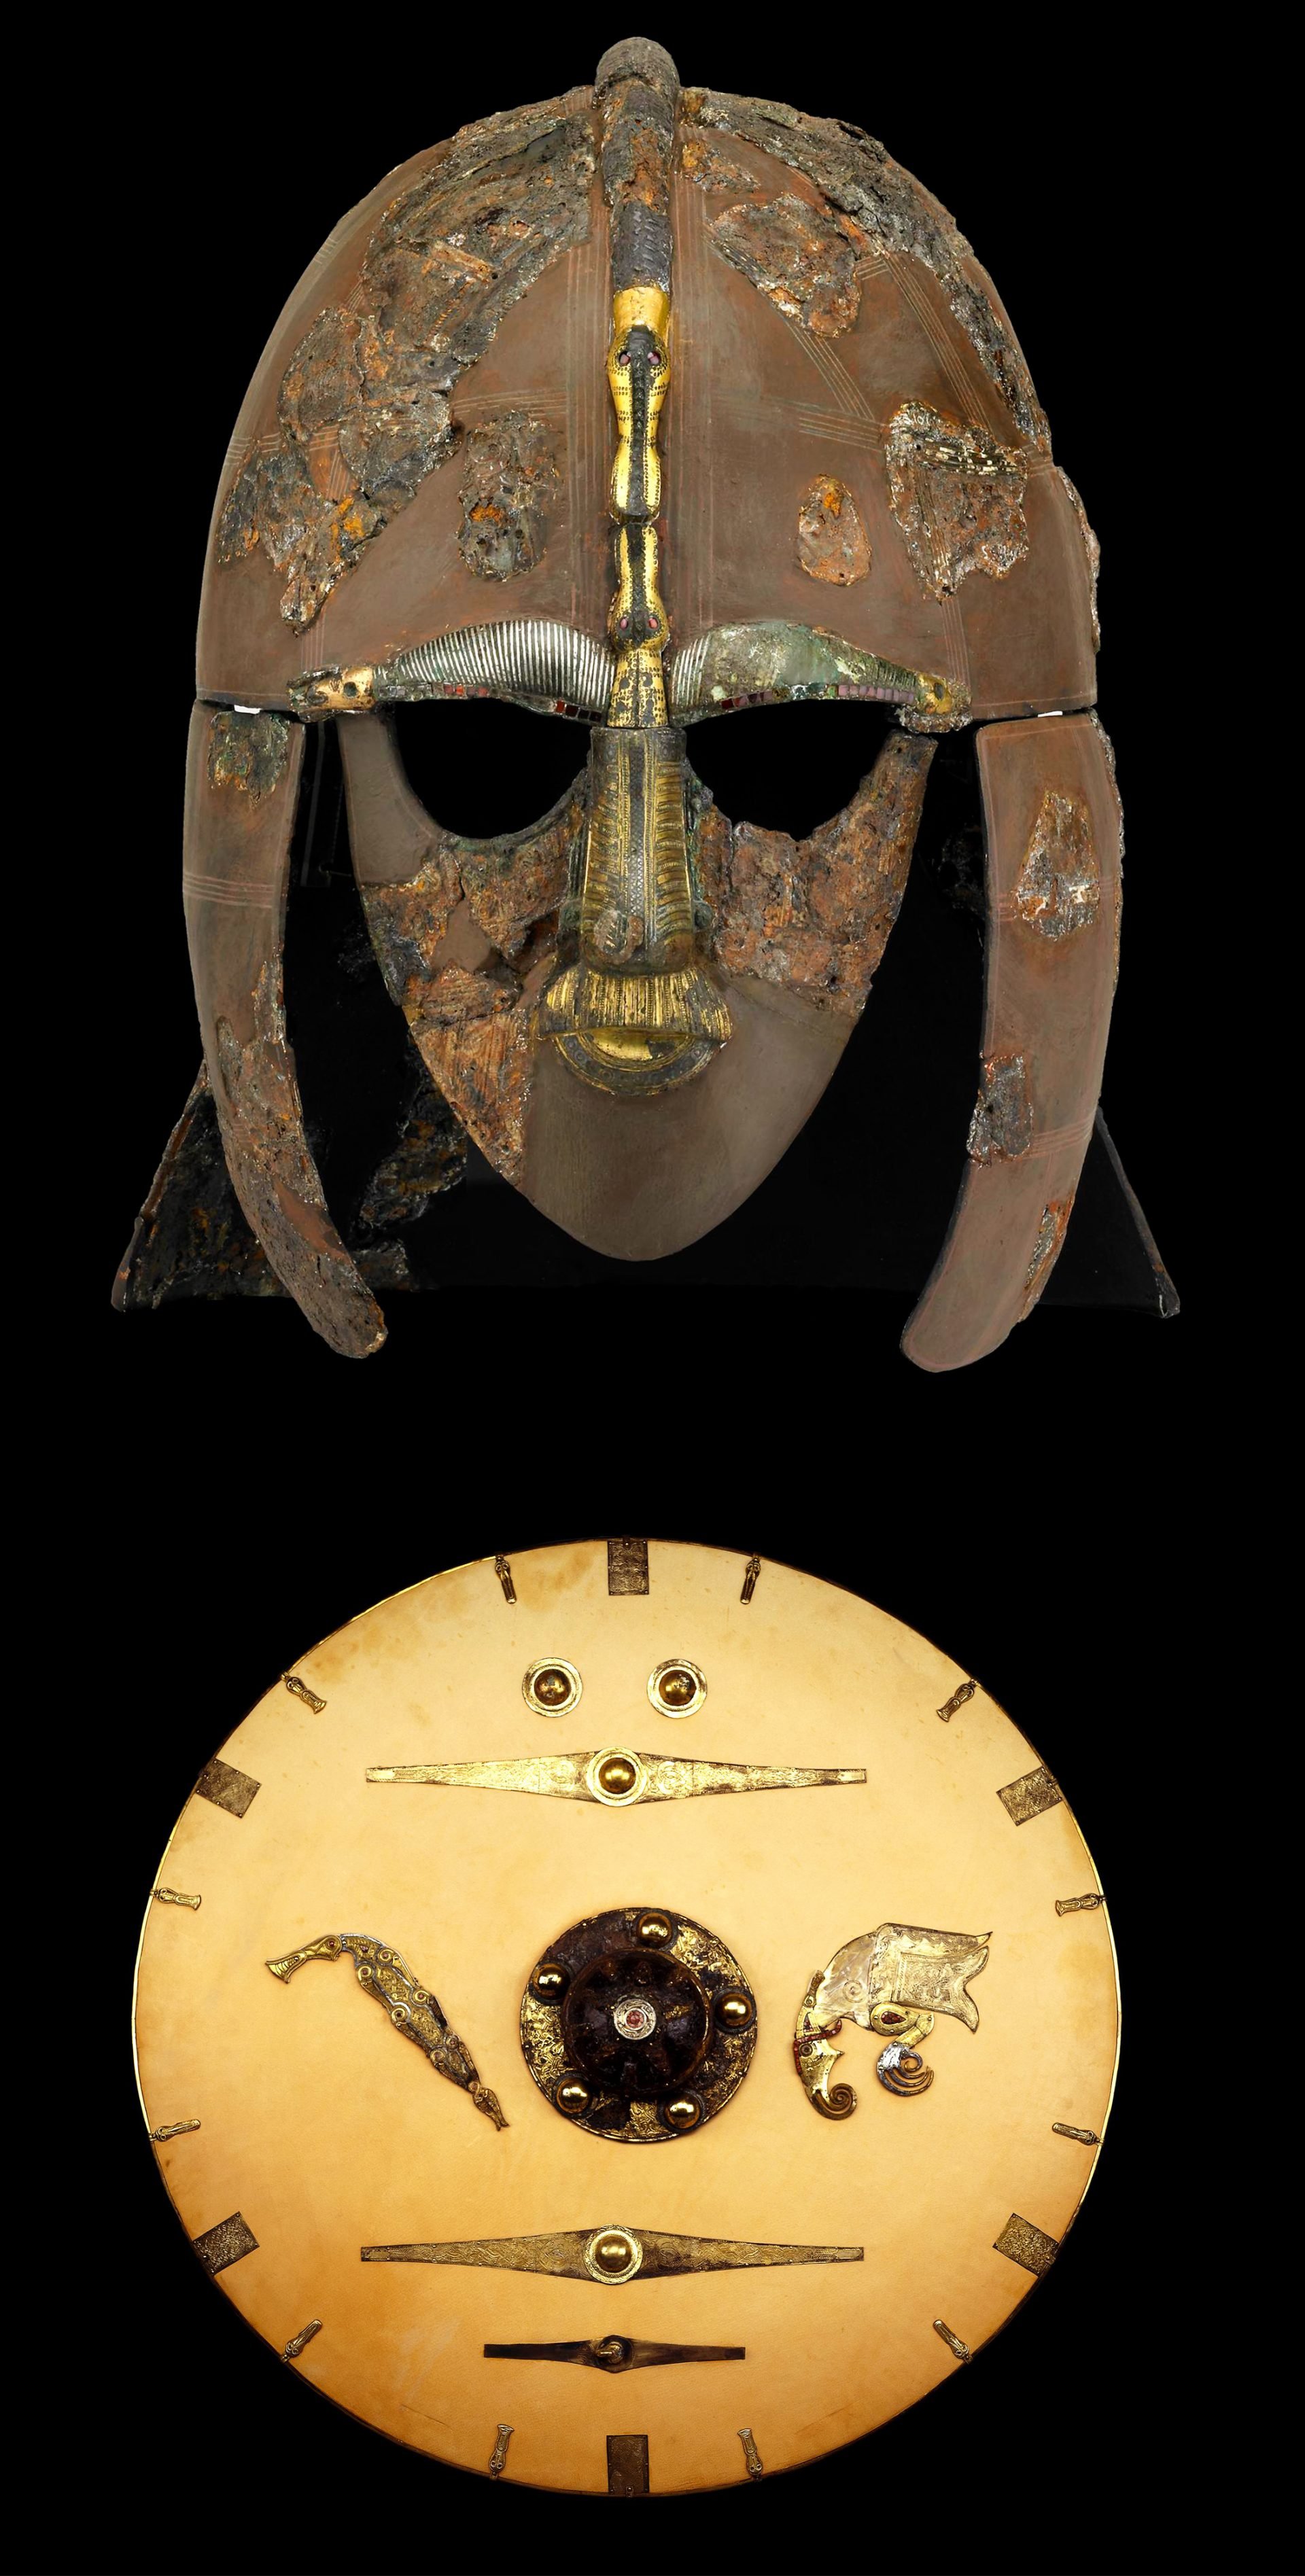 Restored iron helmet adorned with tinned copper alloy sheets that form a cap, cheek-pieces, mask, and neck-guard. The copper sheets showcase stamped designs of intertwined animals and warrior motifs. Adjacent is a Sutton Hoo shield replica, incorporating original elements of gold, garnet, copper alloy, and iron, alongside modern fittings on a lime wood base.